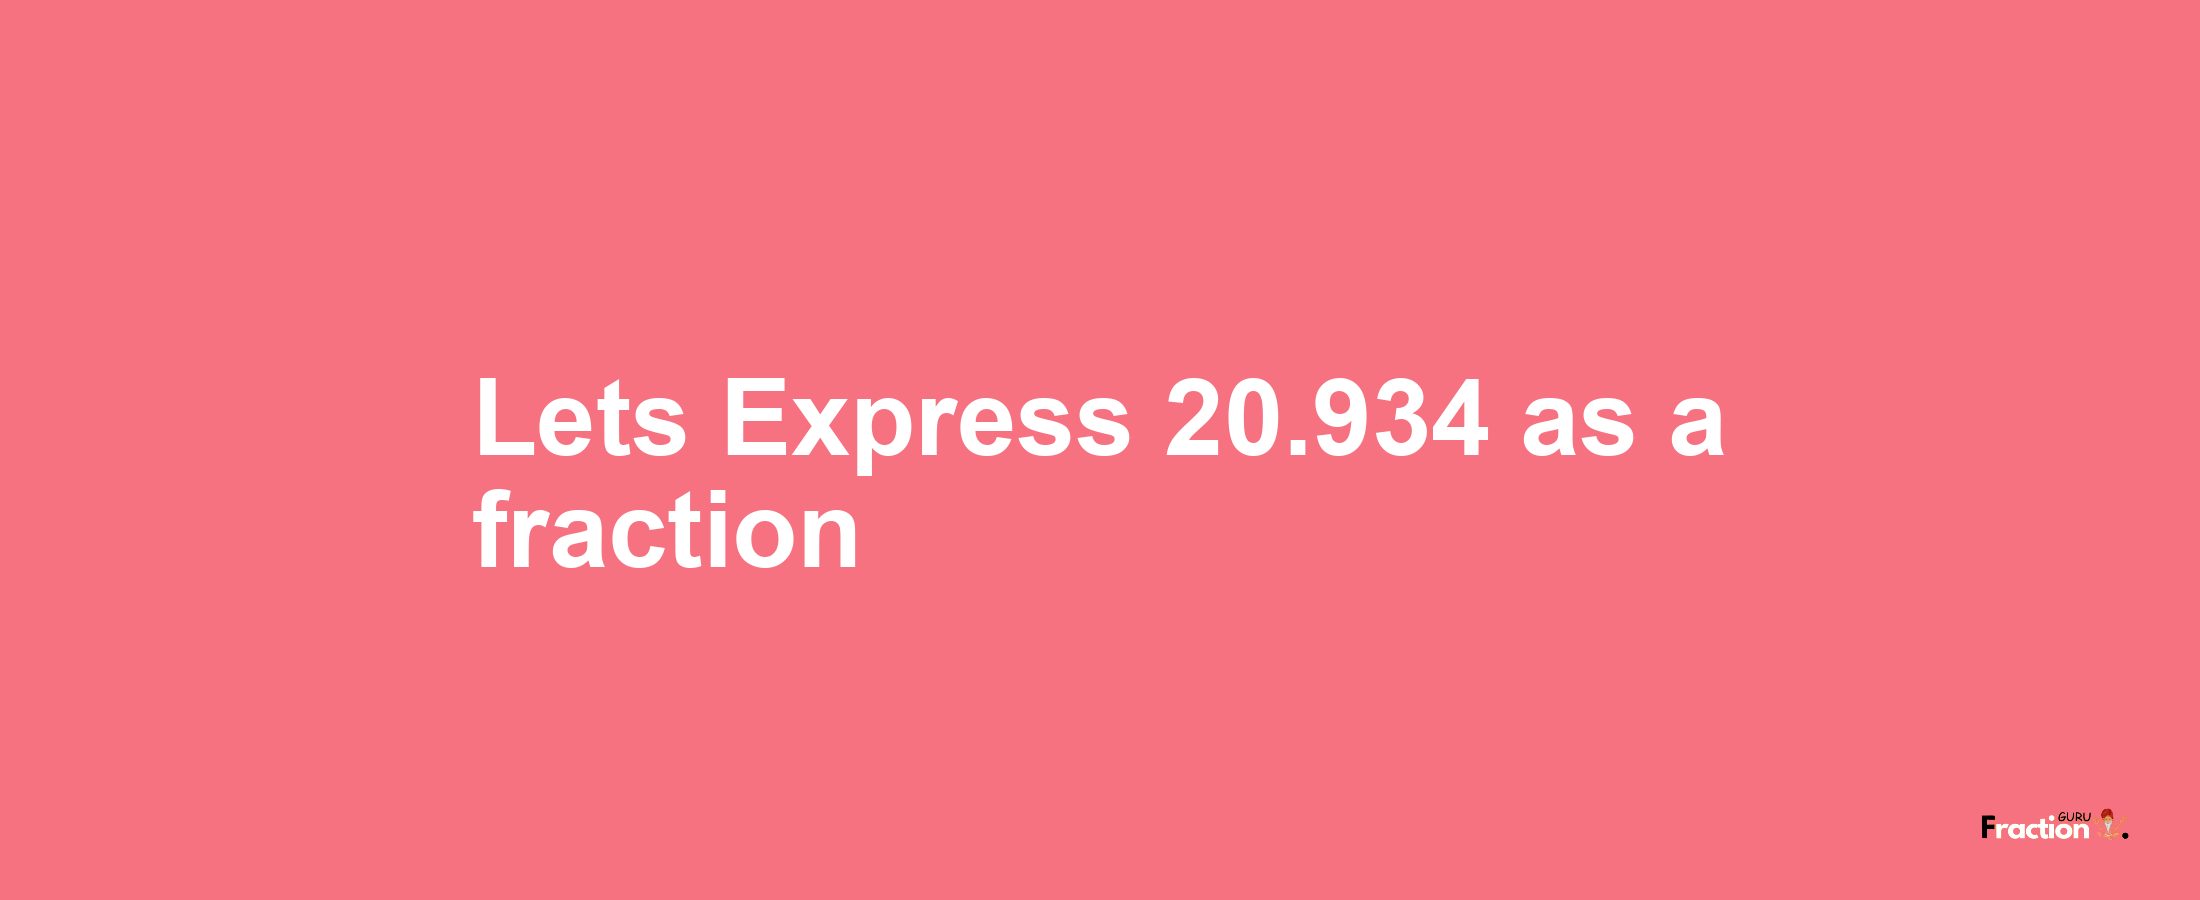 Lets Express 20.934 as afraction